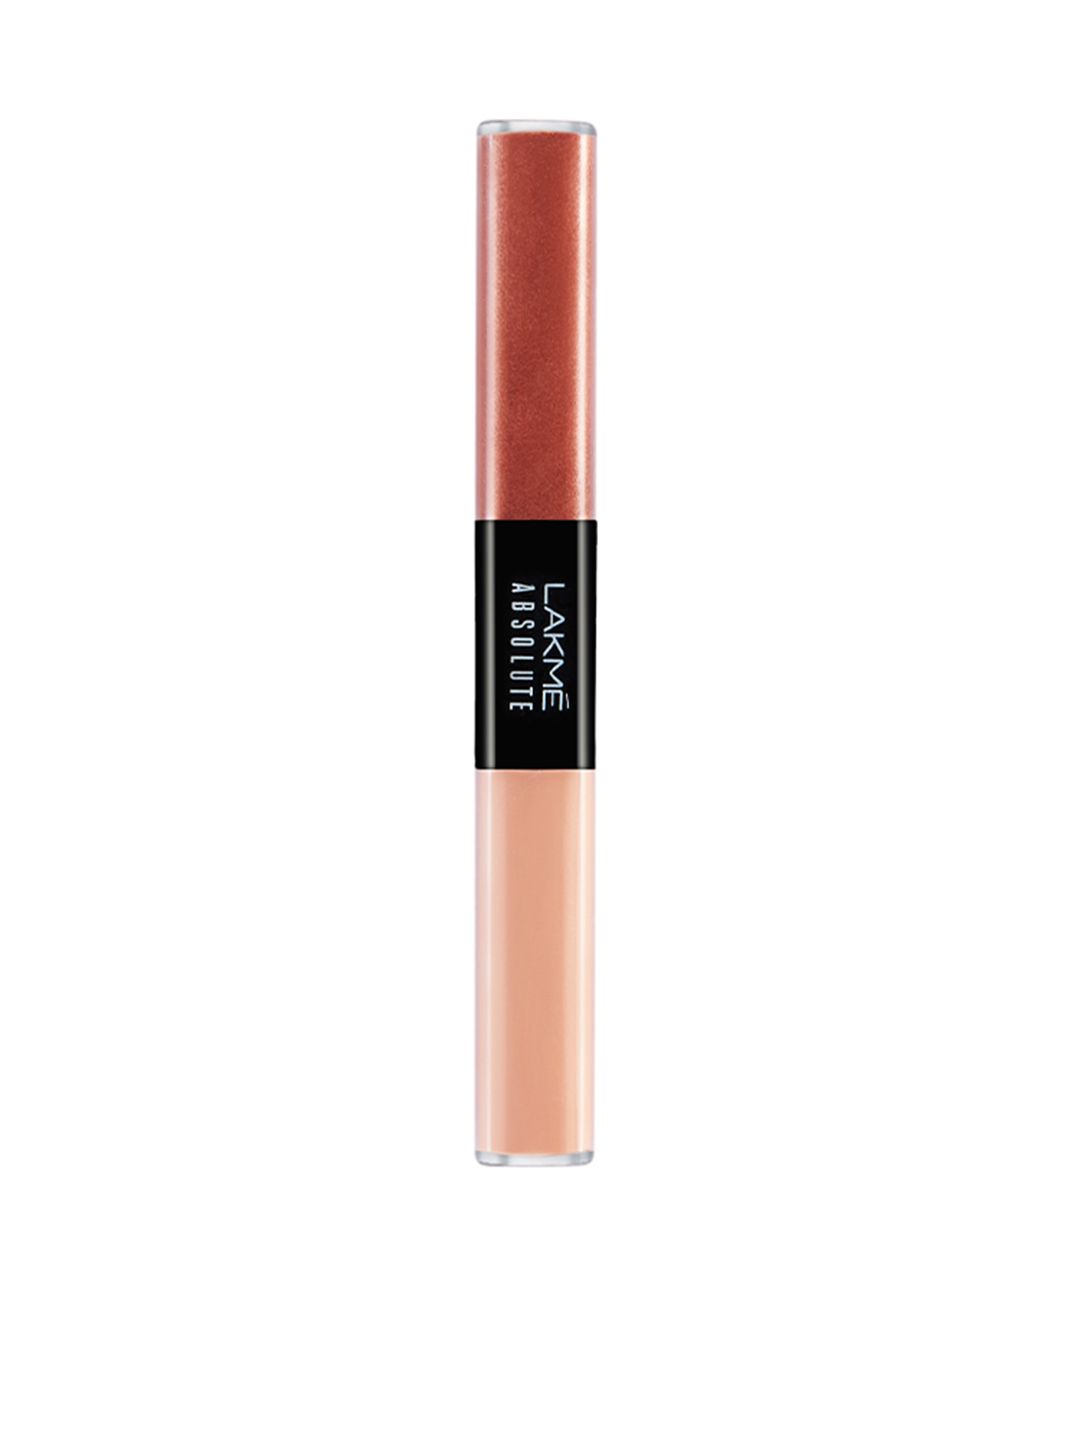 Lakme Absolute Explore Liquid Eye Shadow 10 ml - Earthy Matte & Shimmering Sunset Price in India